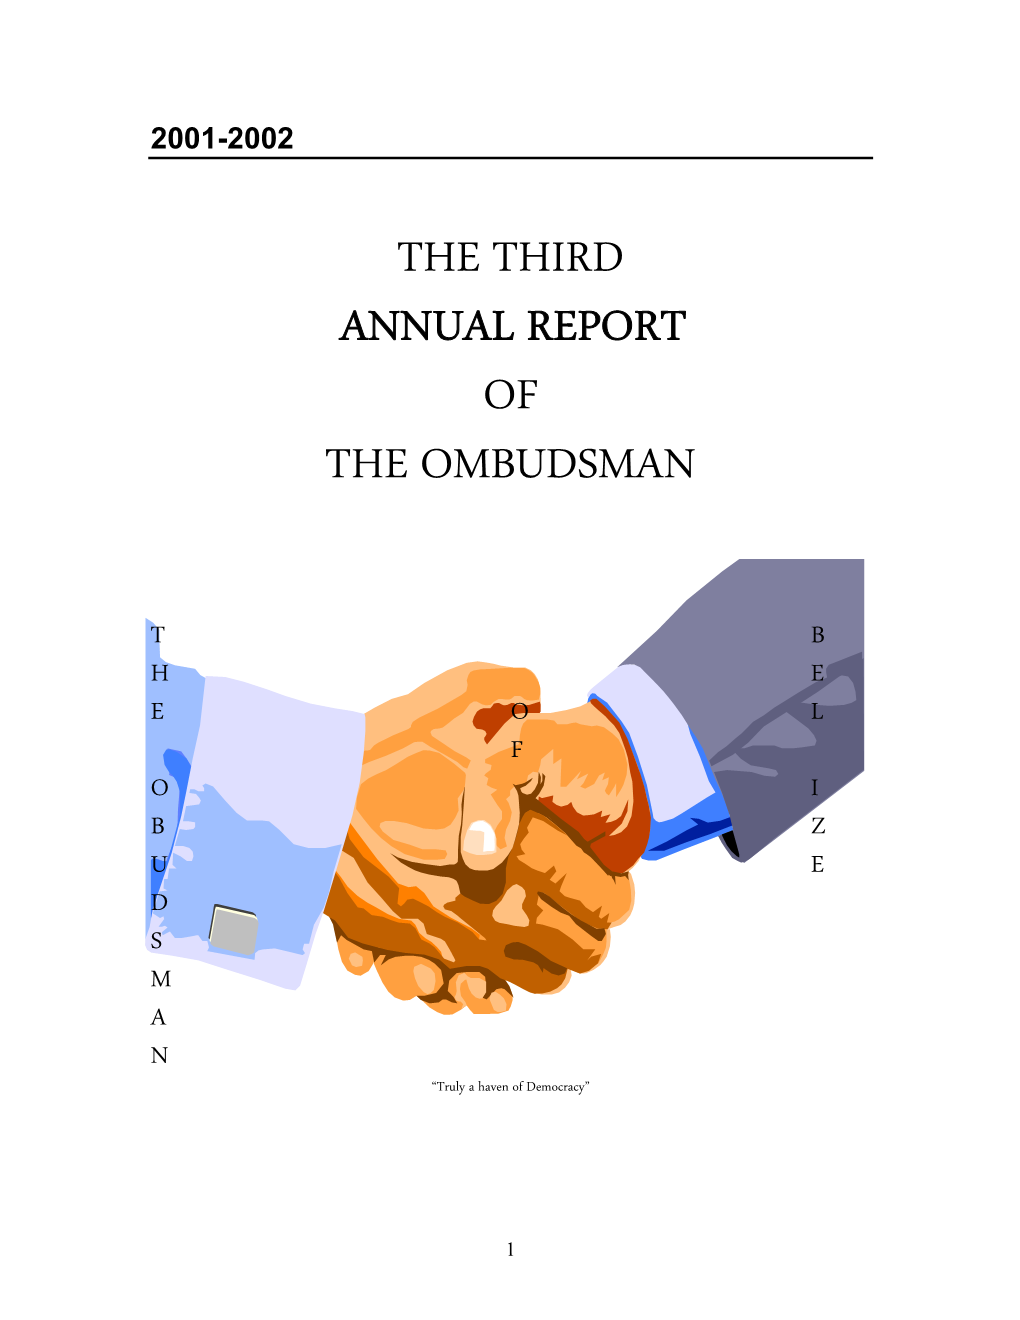 The Third Annual Report of the Ombudsman